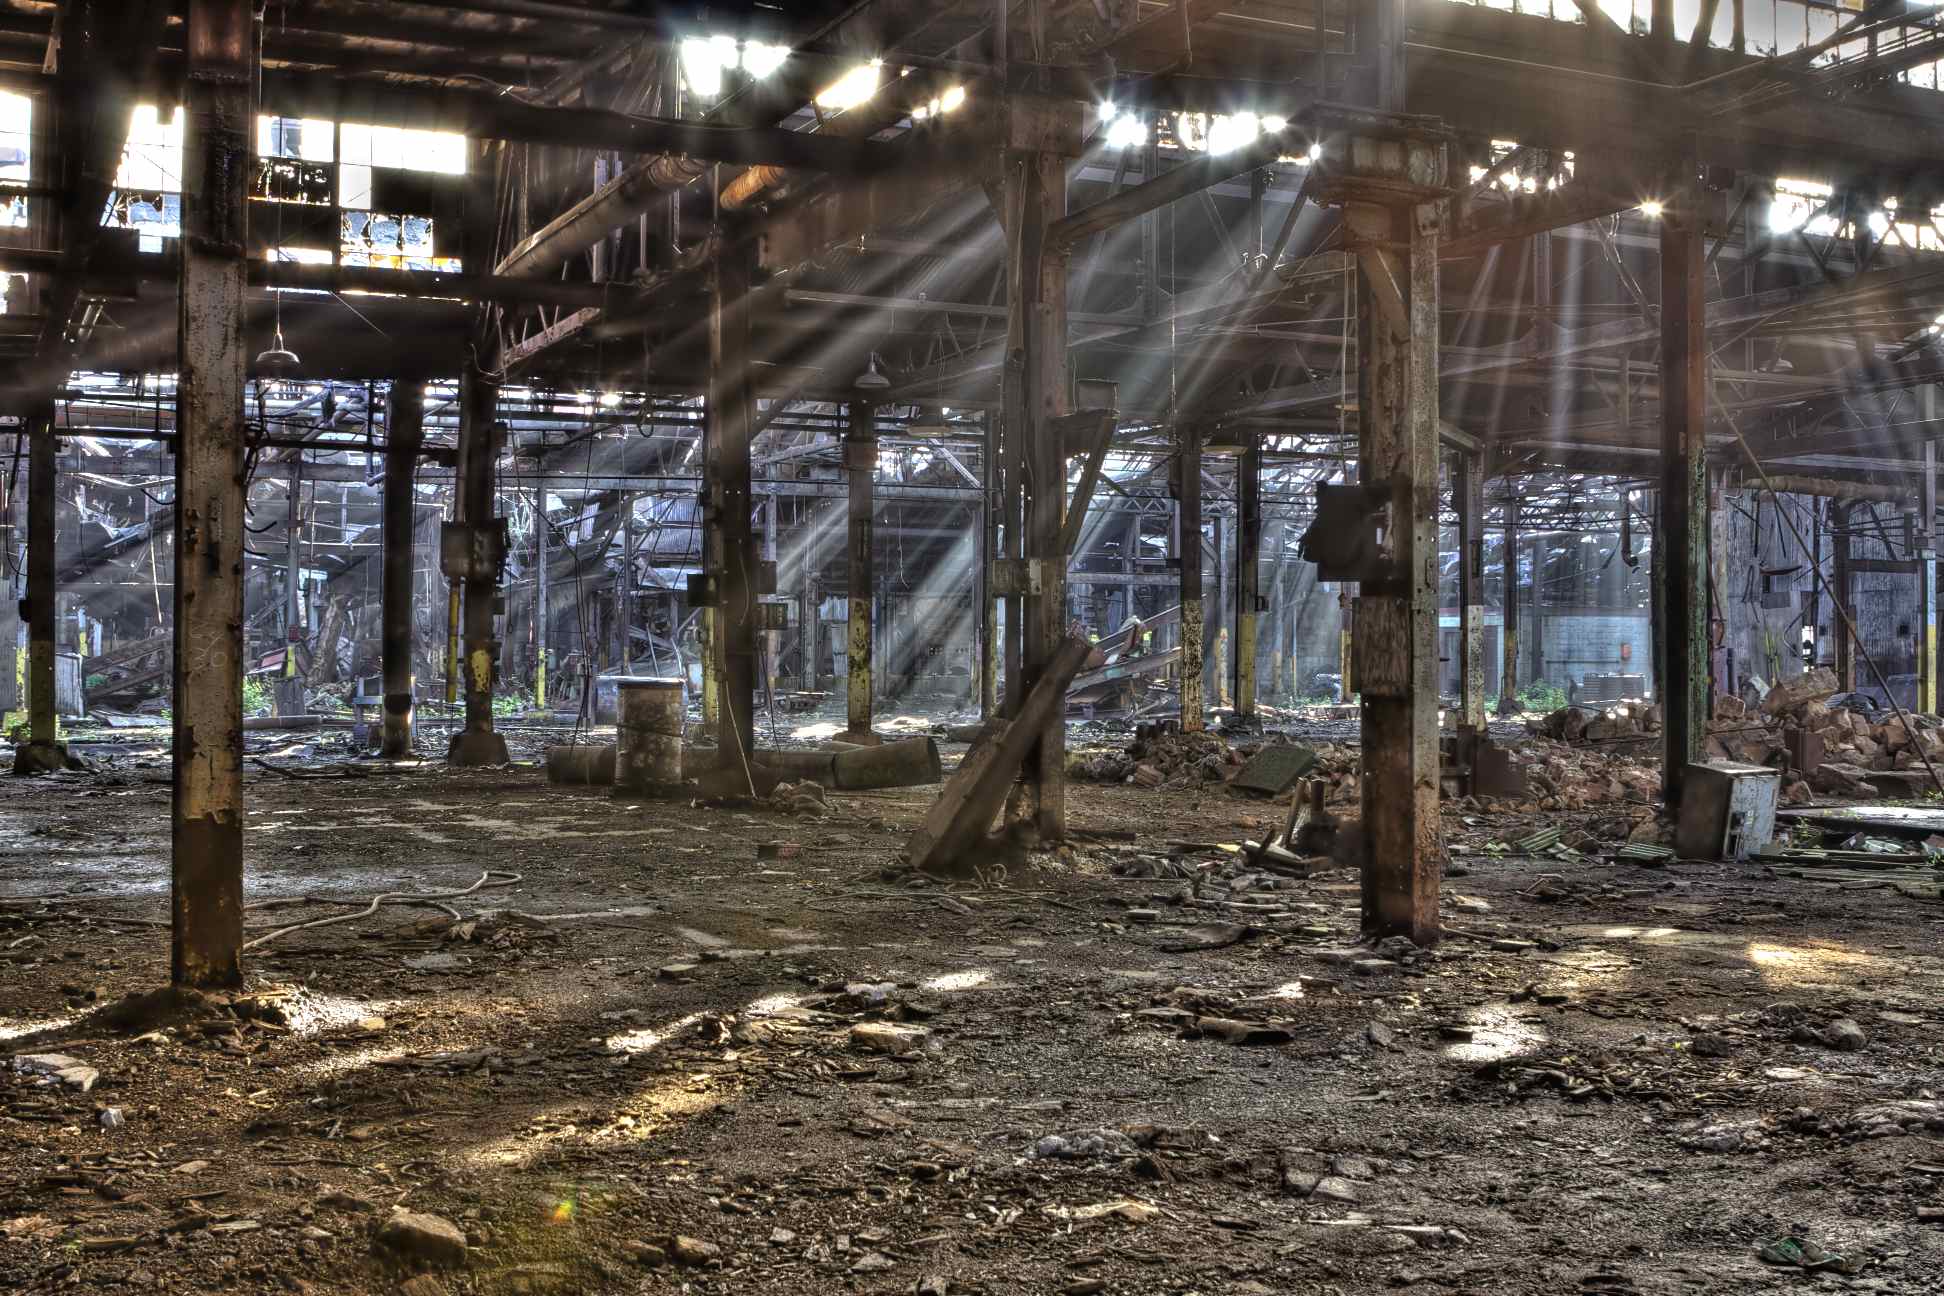 Fort Pitt Foundry: Ghosts of My Kin